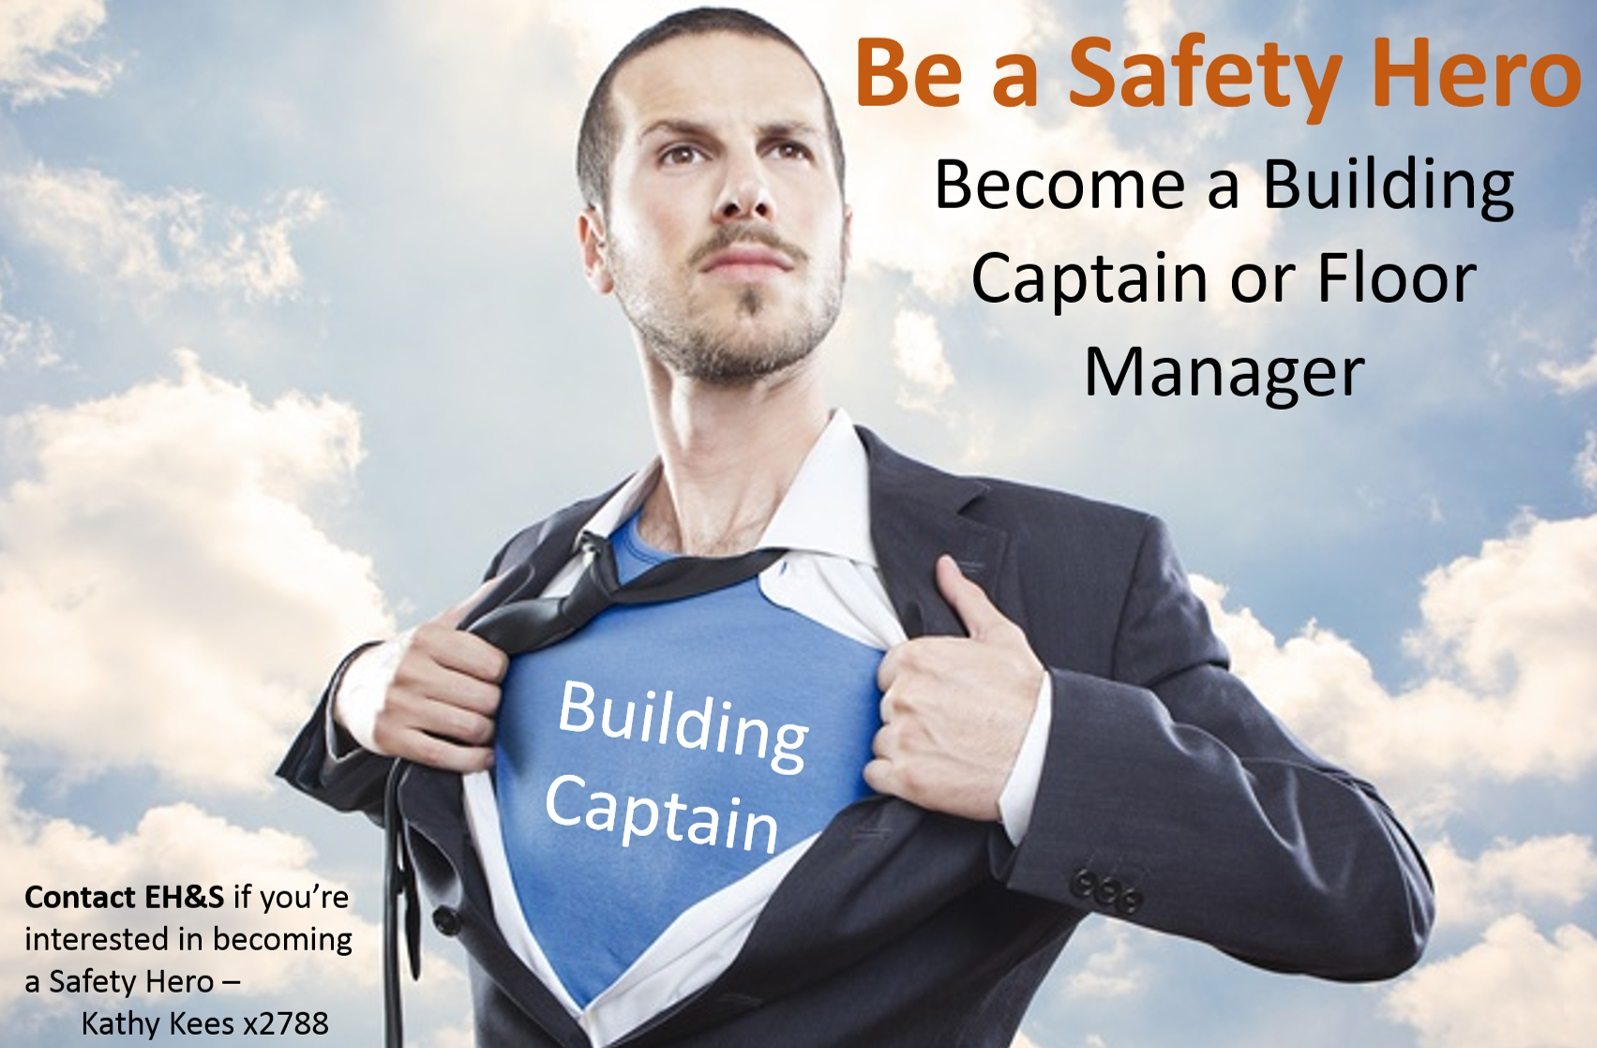 Become a safety hero. Contact Environmental Health and Safety if you are interested in becoming a building captain or floor manager.